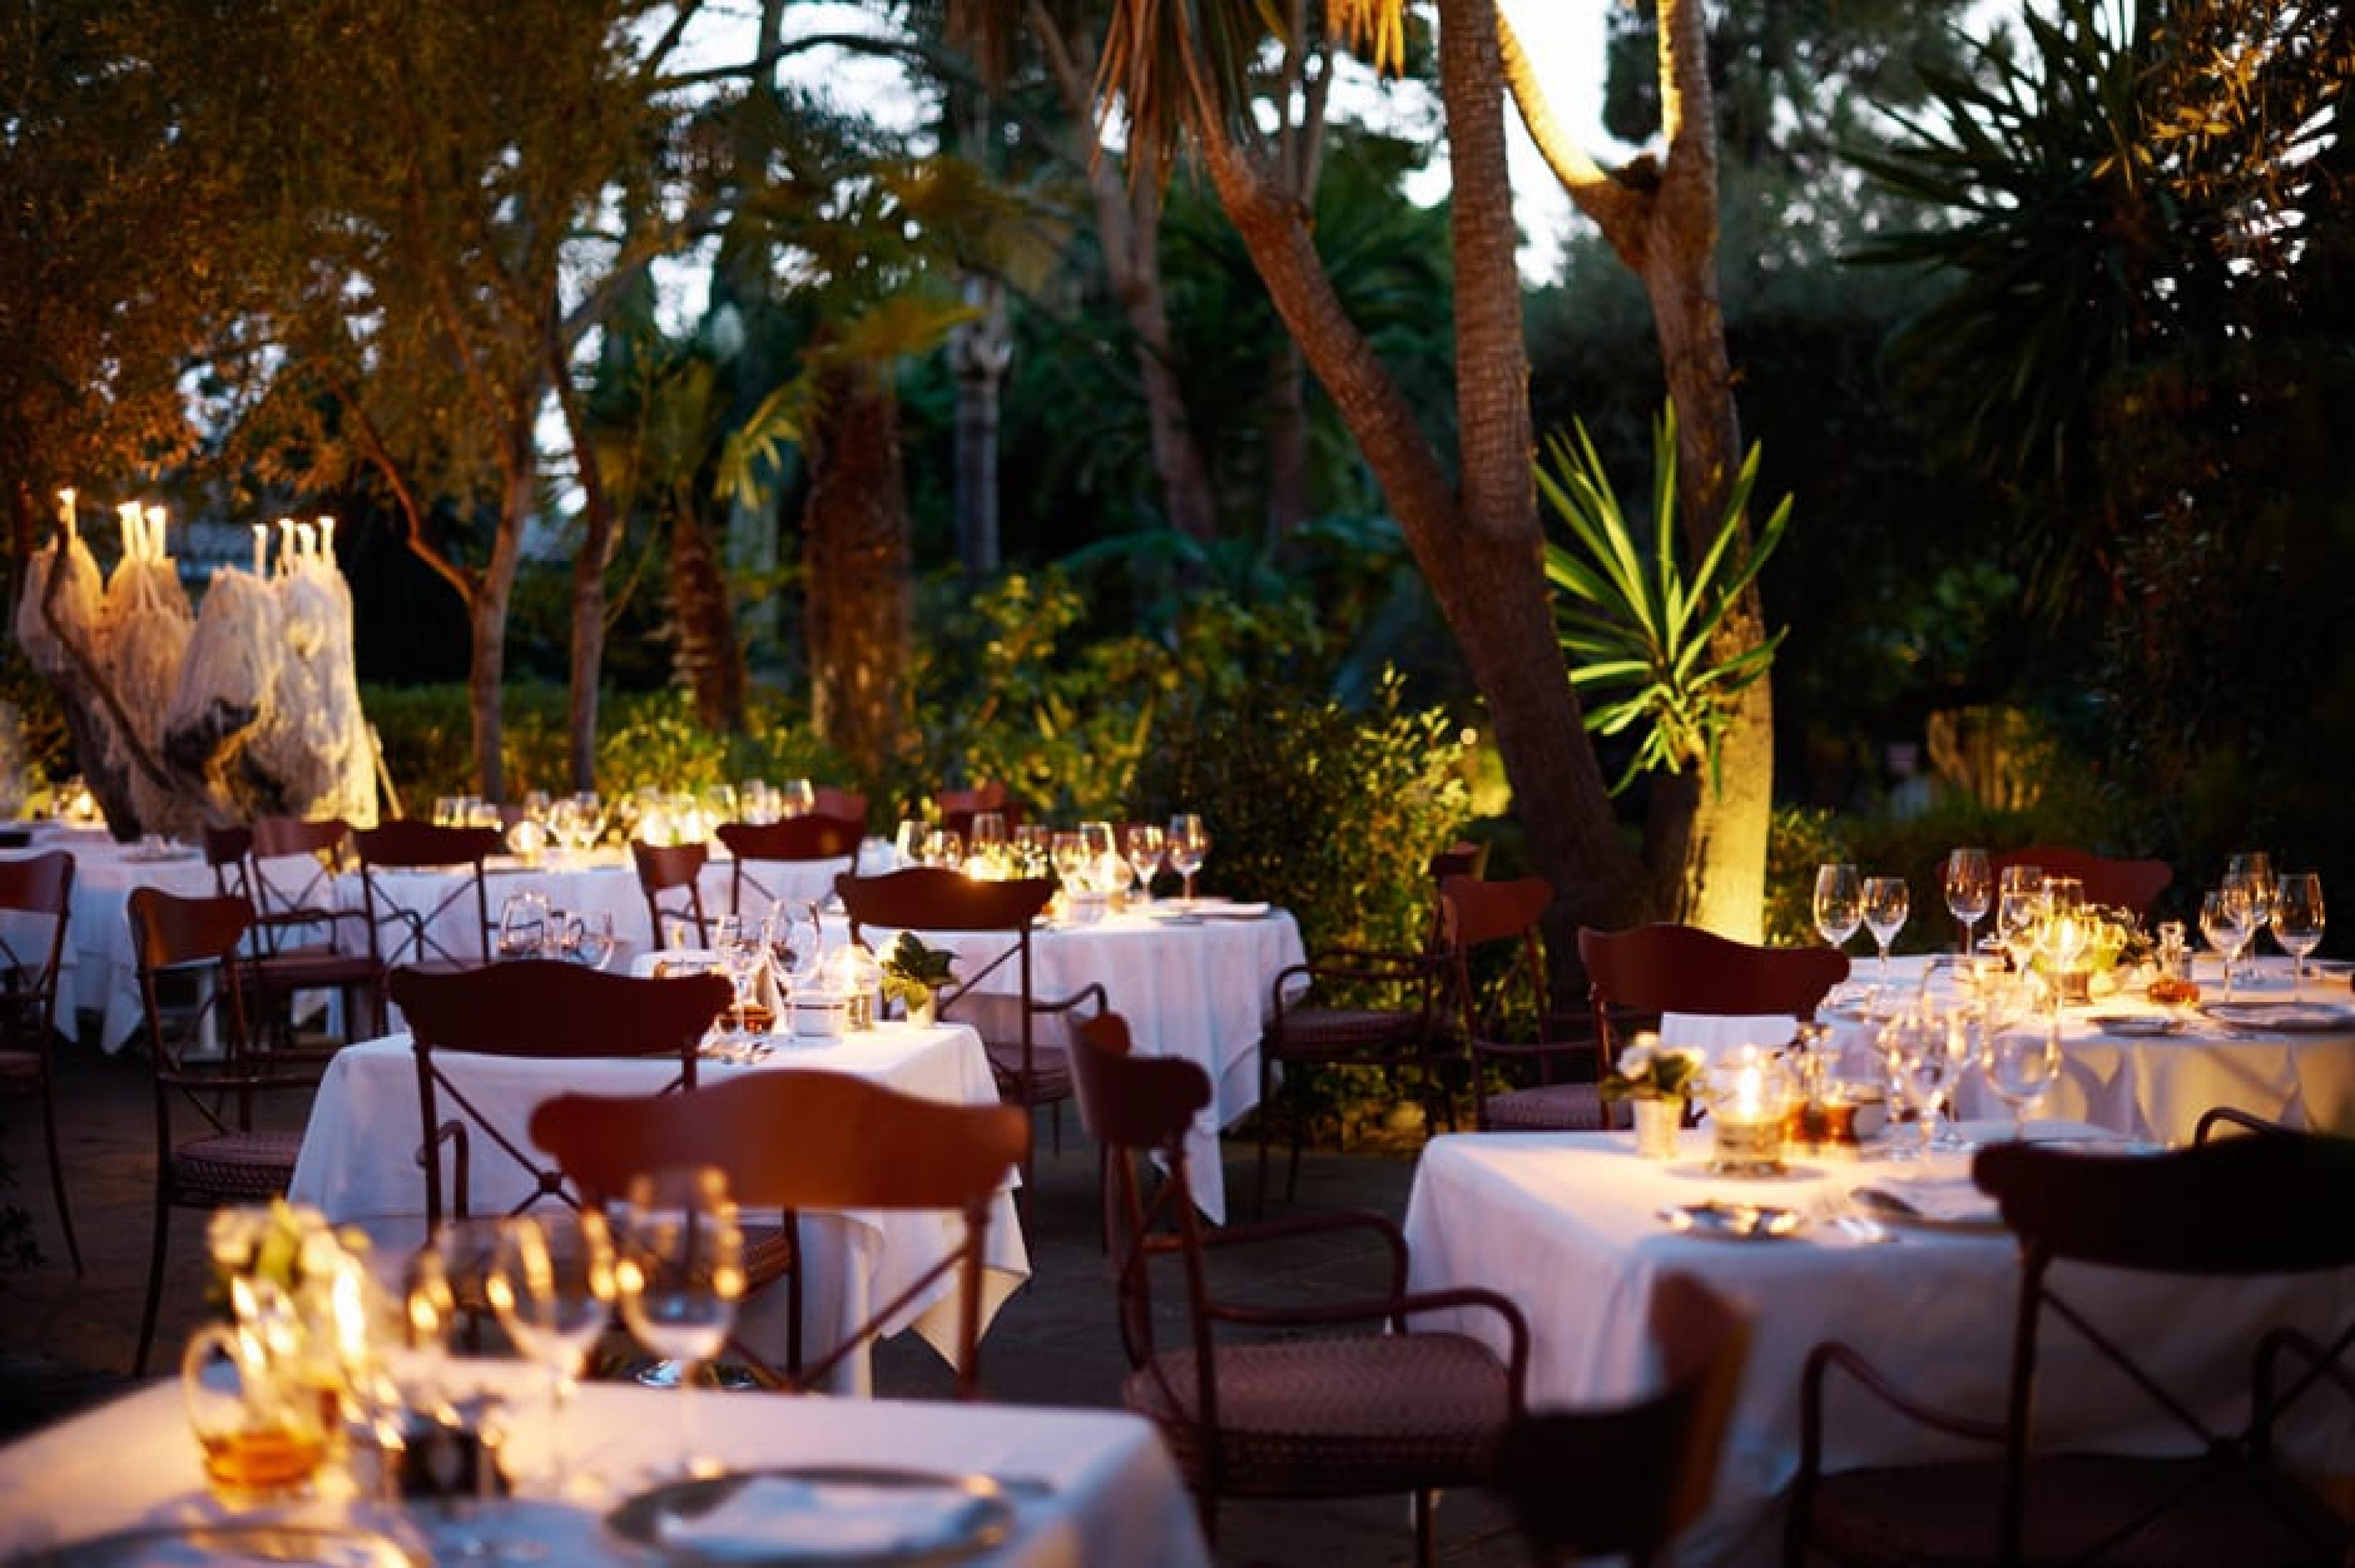 Dining at The Grill, Marbella, Spain